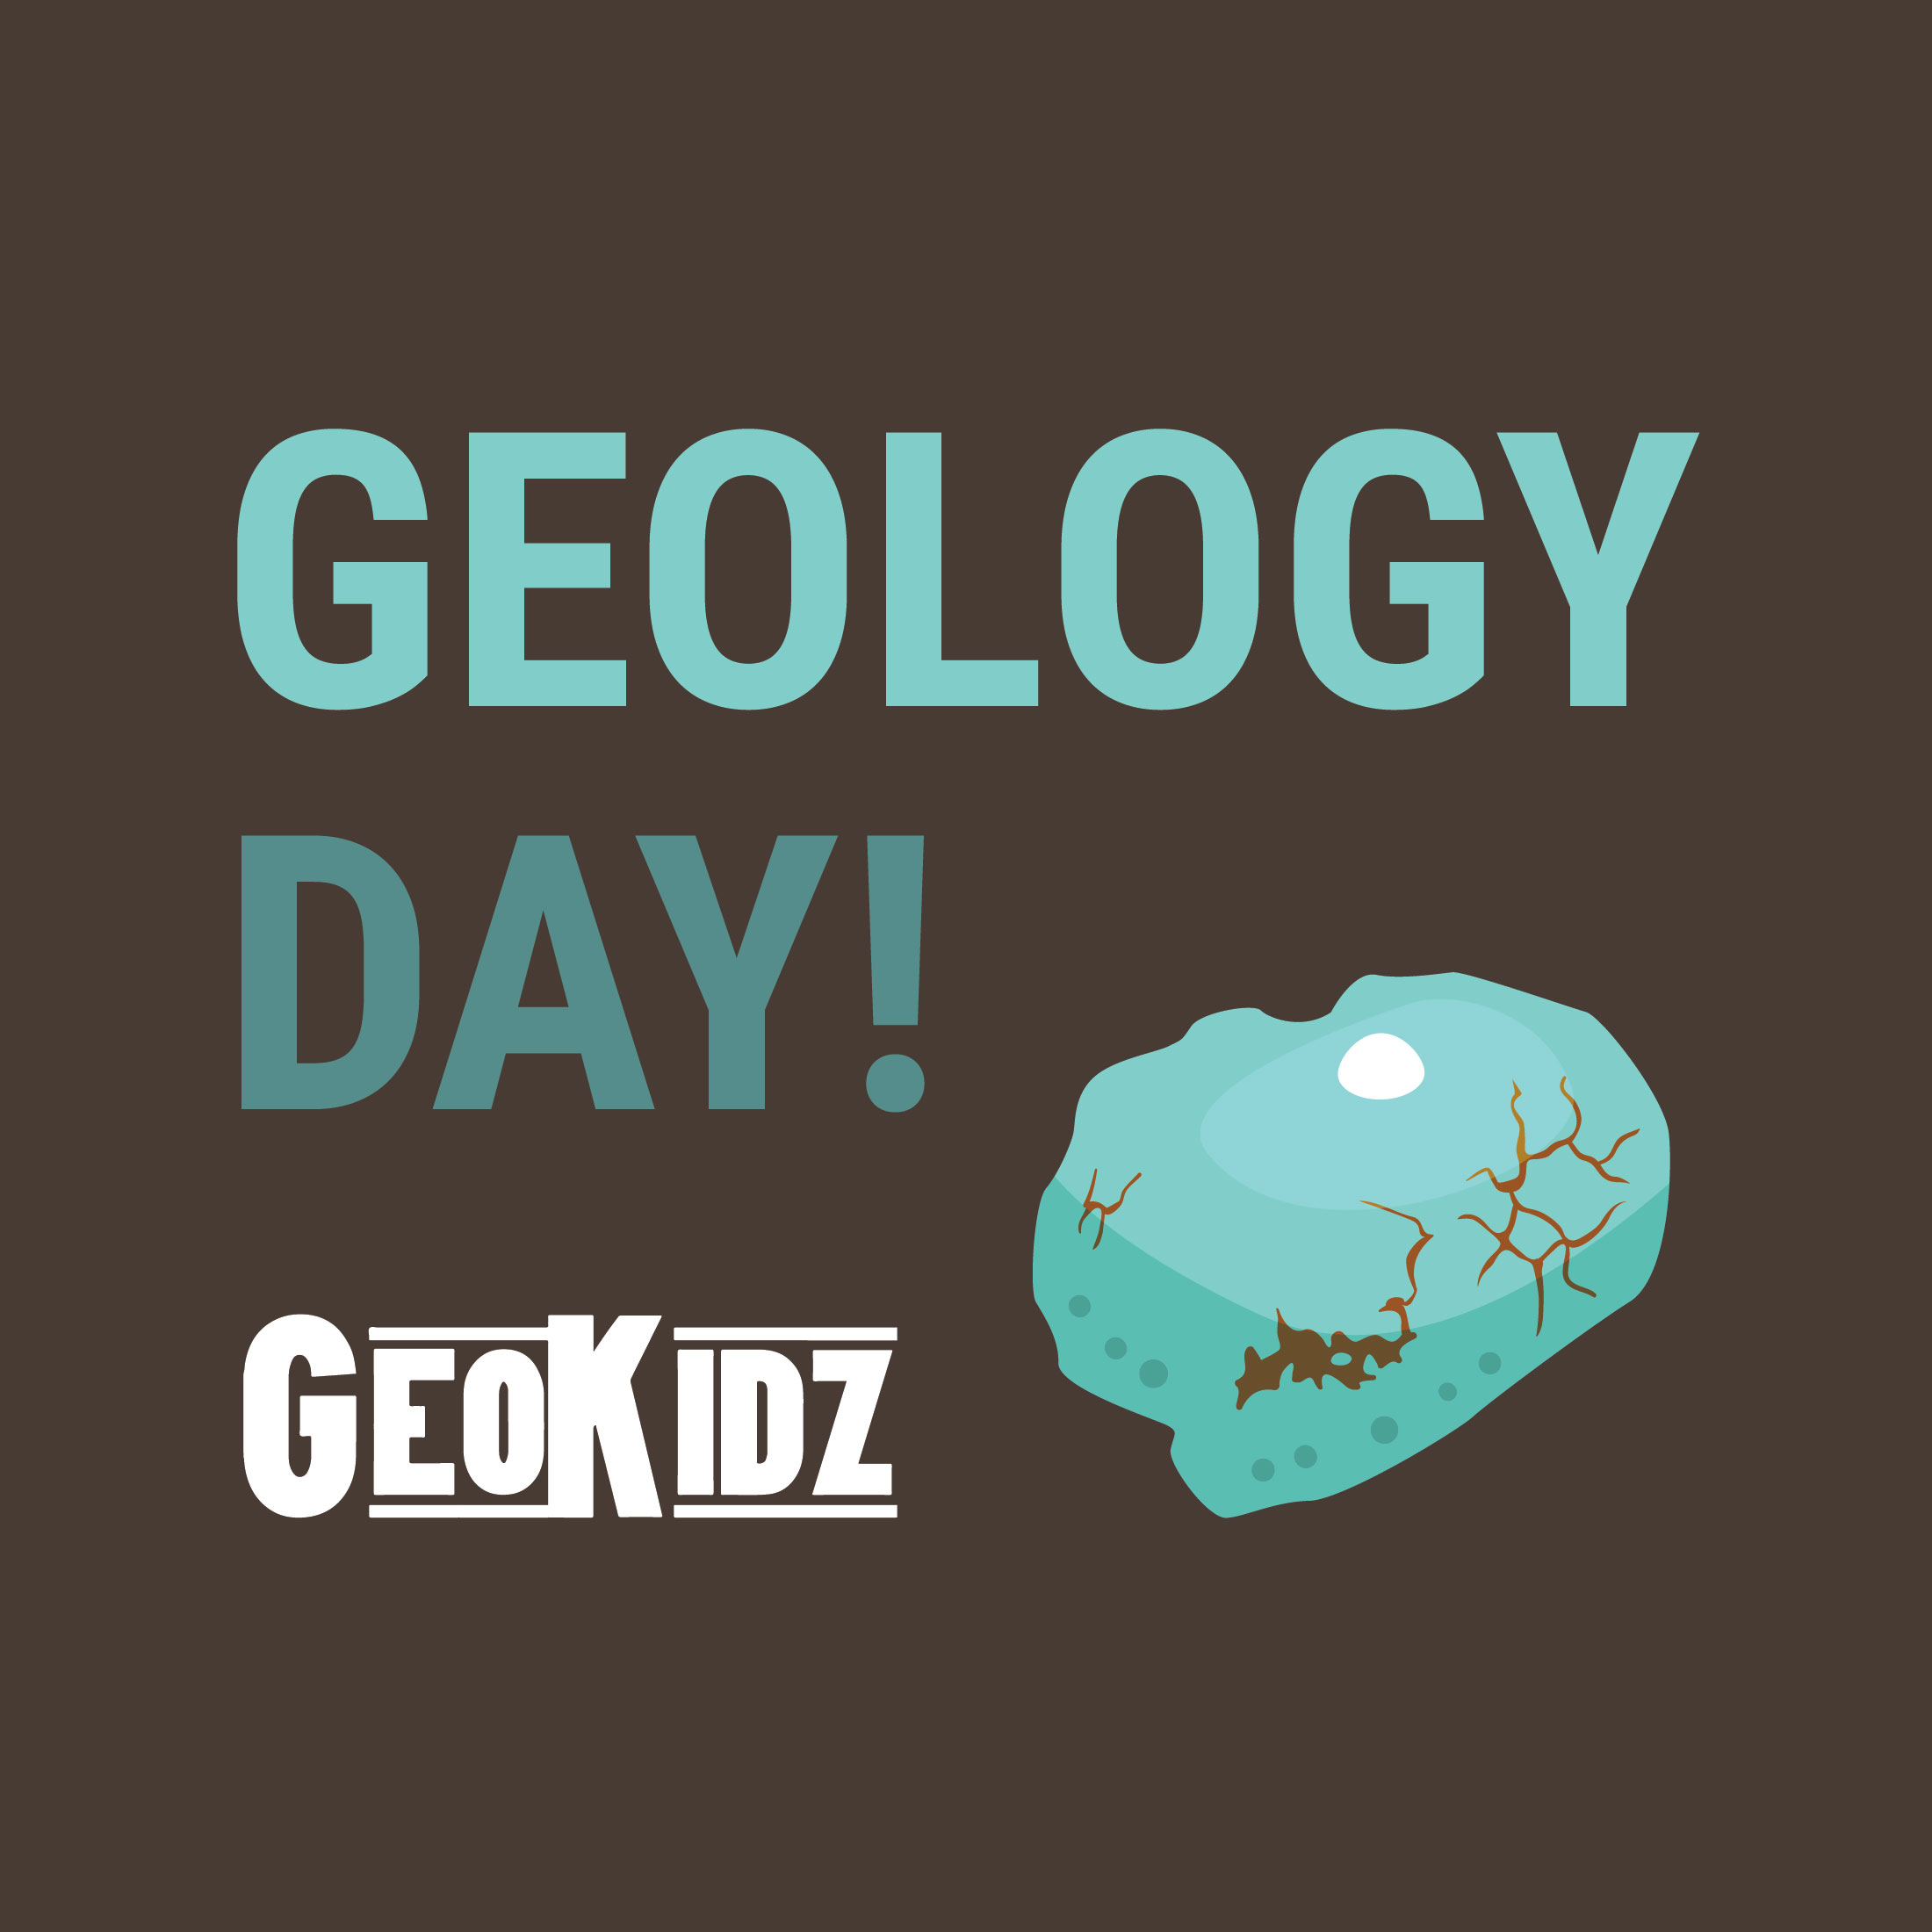 Geology Day